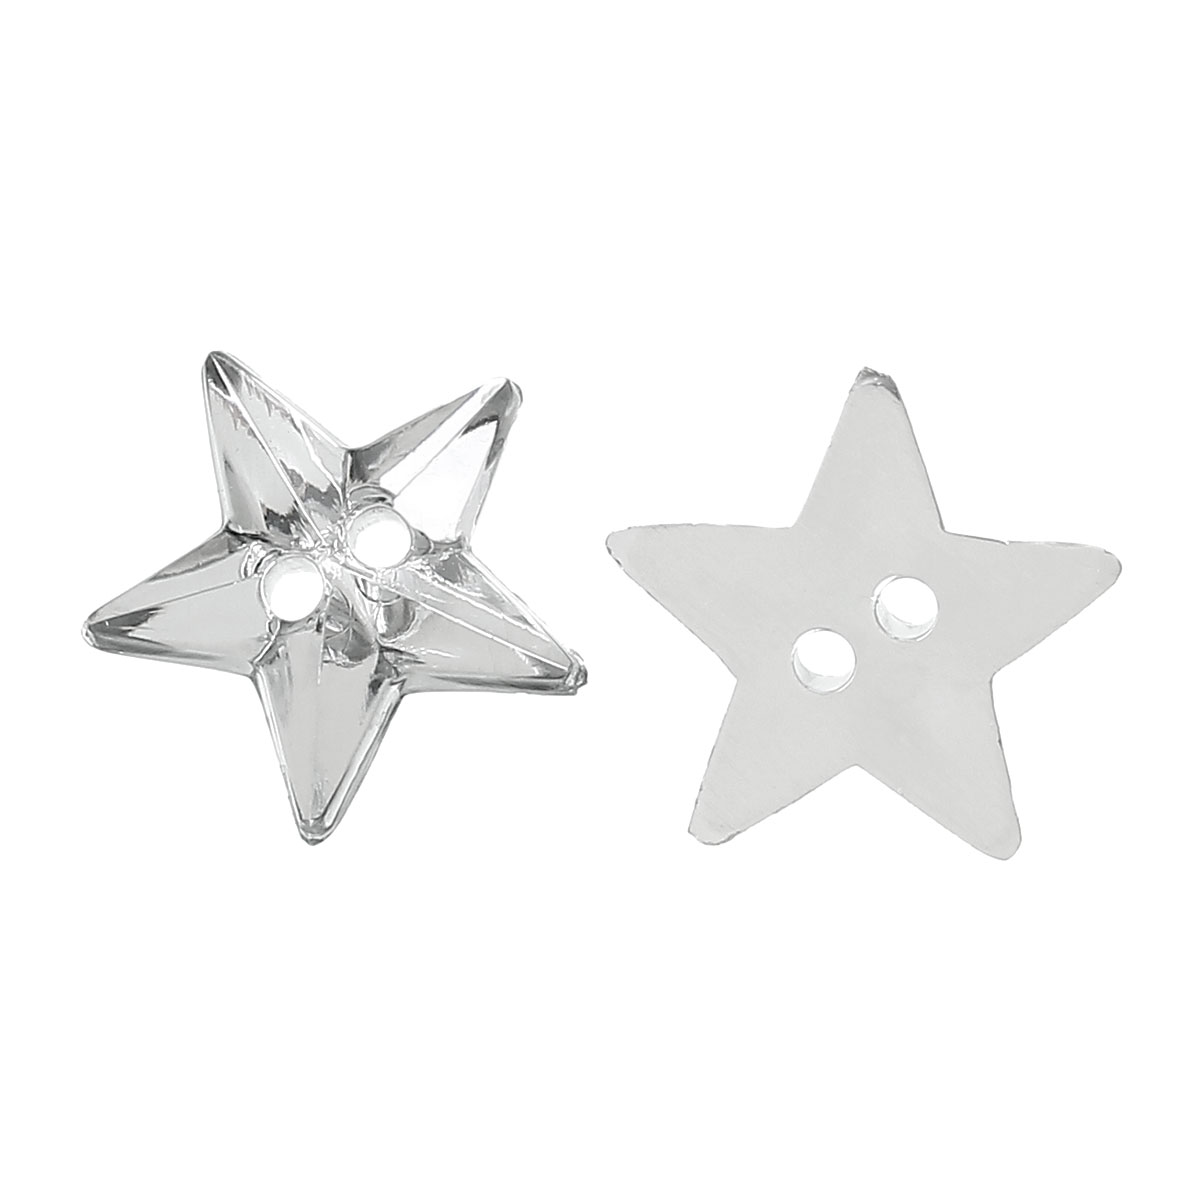 Гаджет  Acrylic Sewing Button Scrapbooking Stars White 2 Holes 13.0mm( 4/8")x 12.0mm( 4/8"),20 PCs 2015 new None Дом и Сад